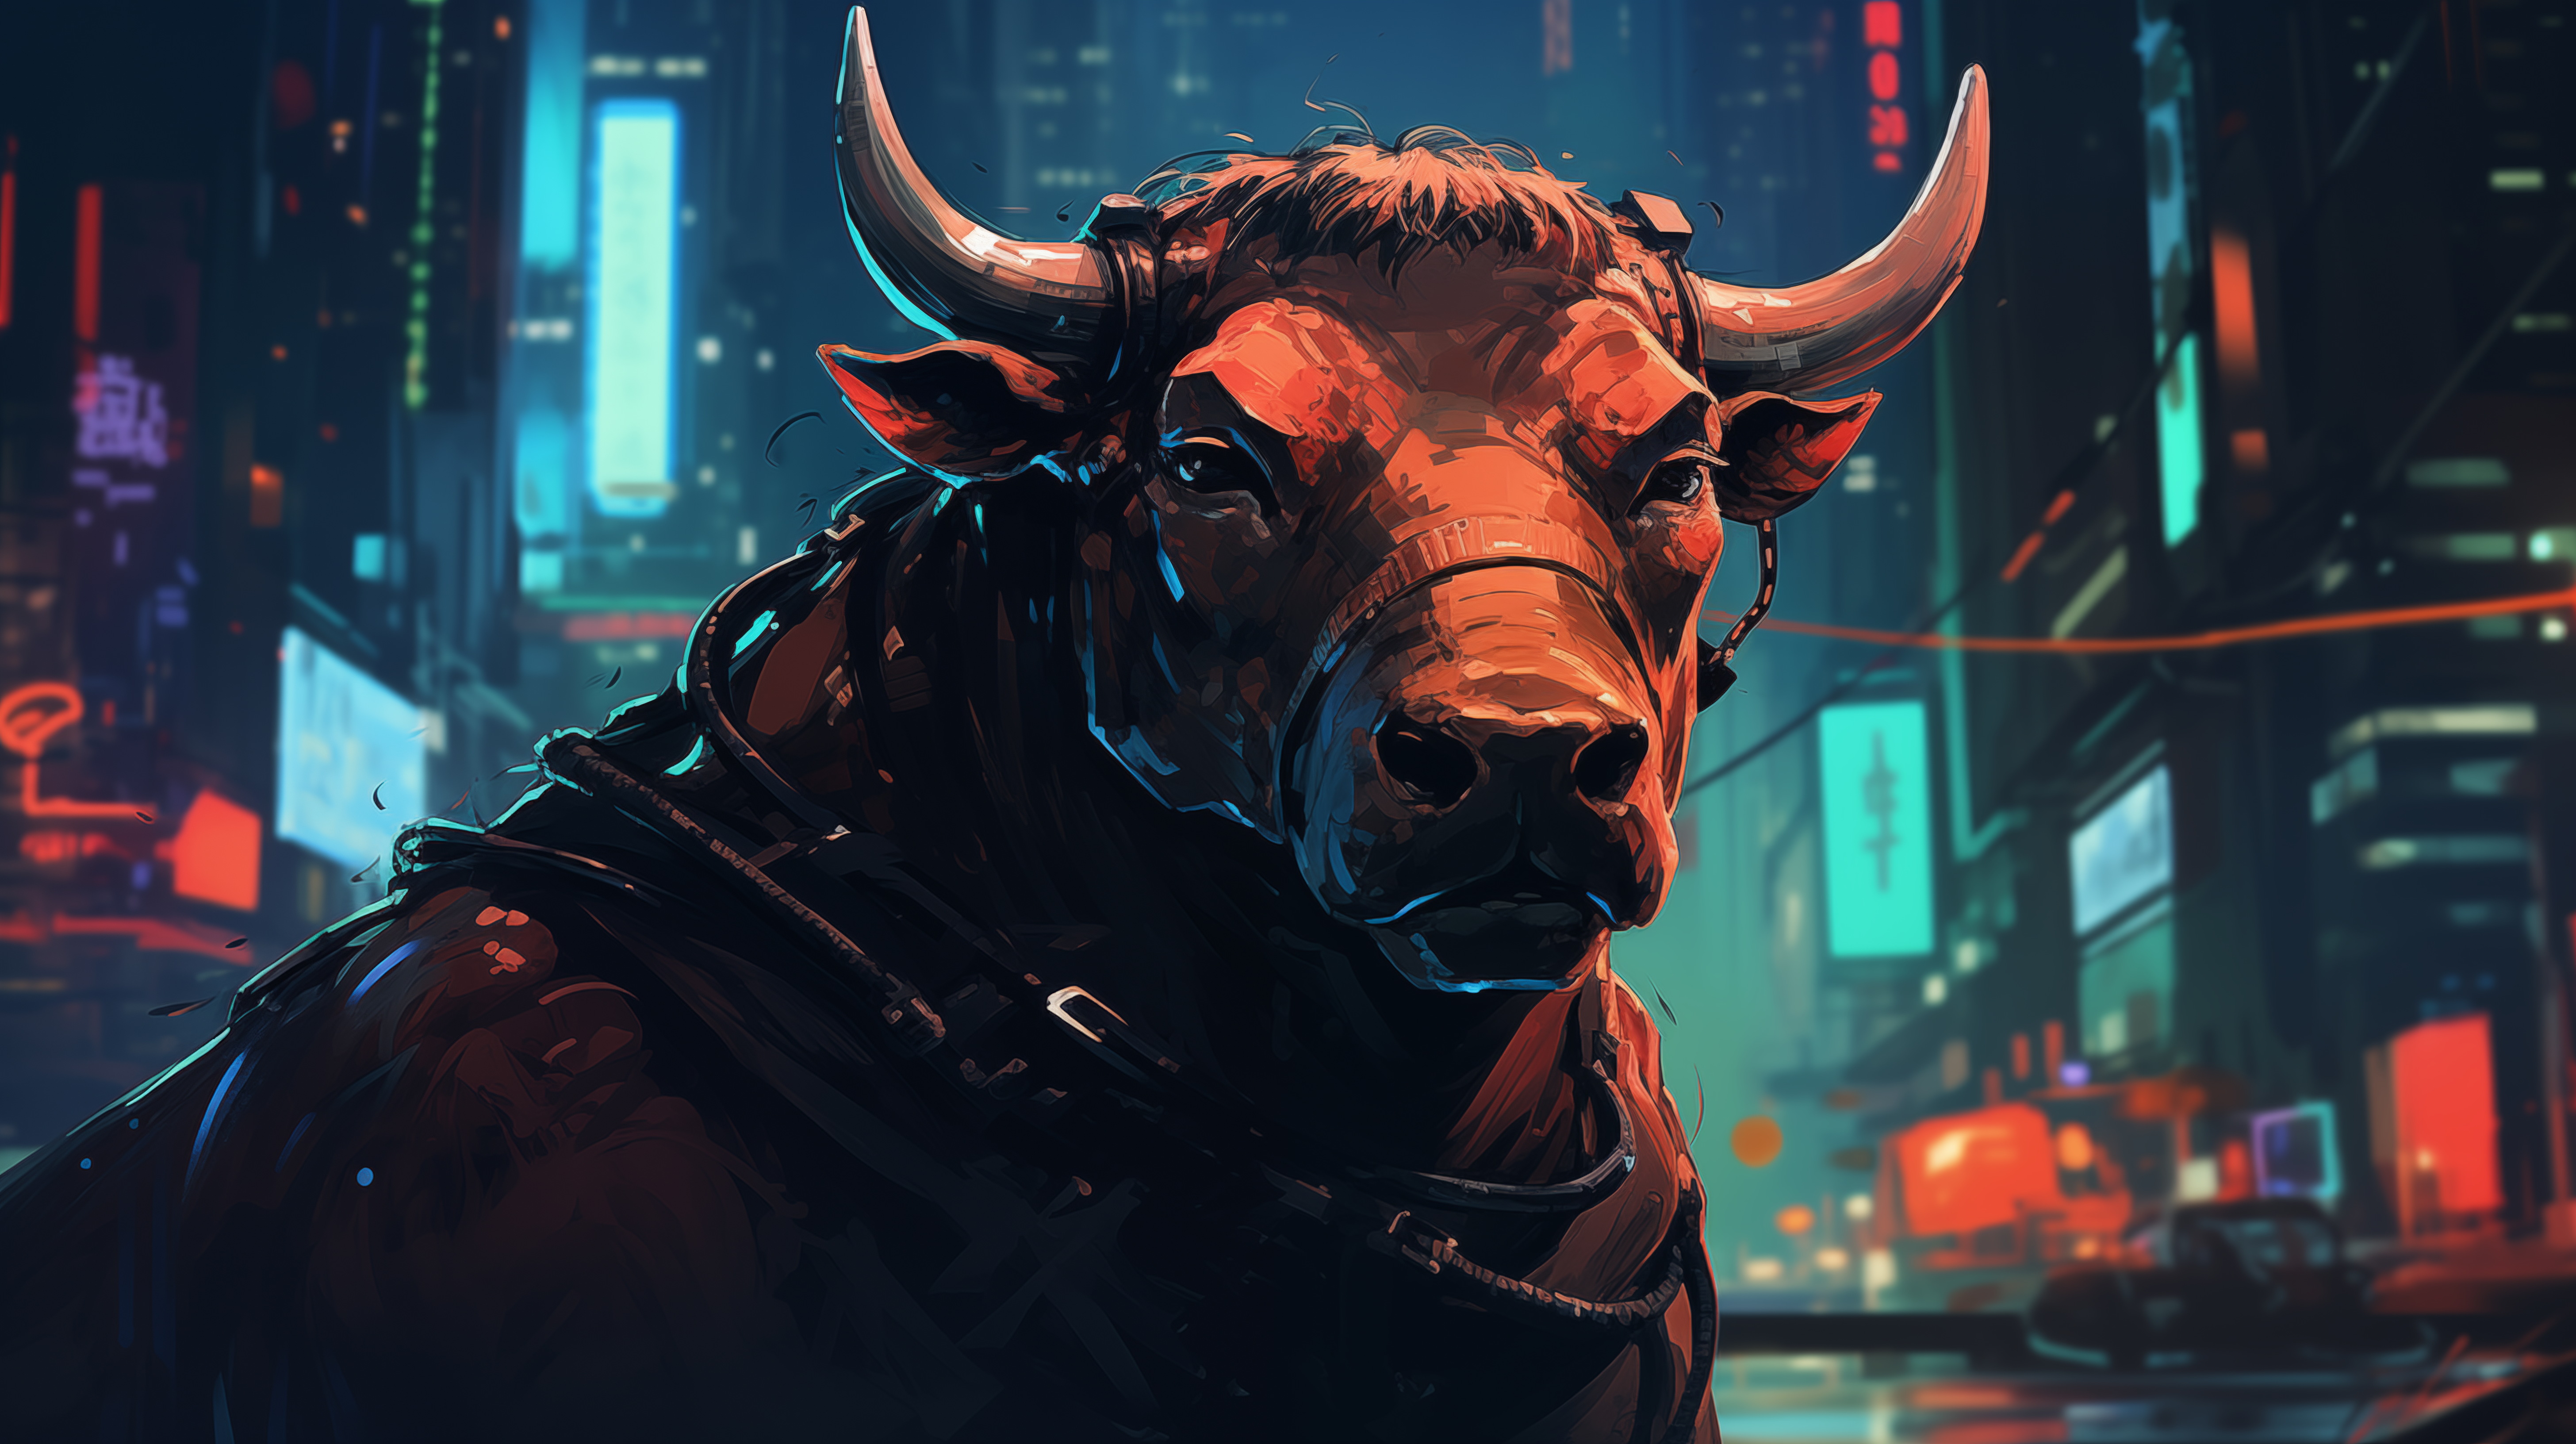 Cyberpunk-inspired bull standing in a neon-lit cityscape, HD desktop wallpaper and background.